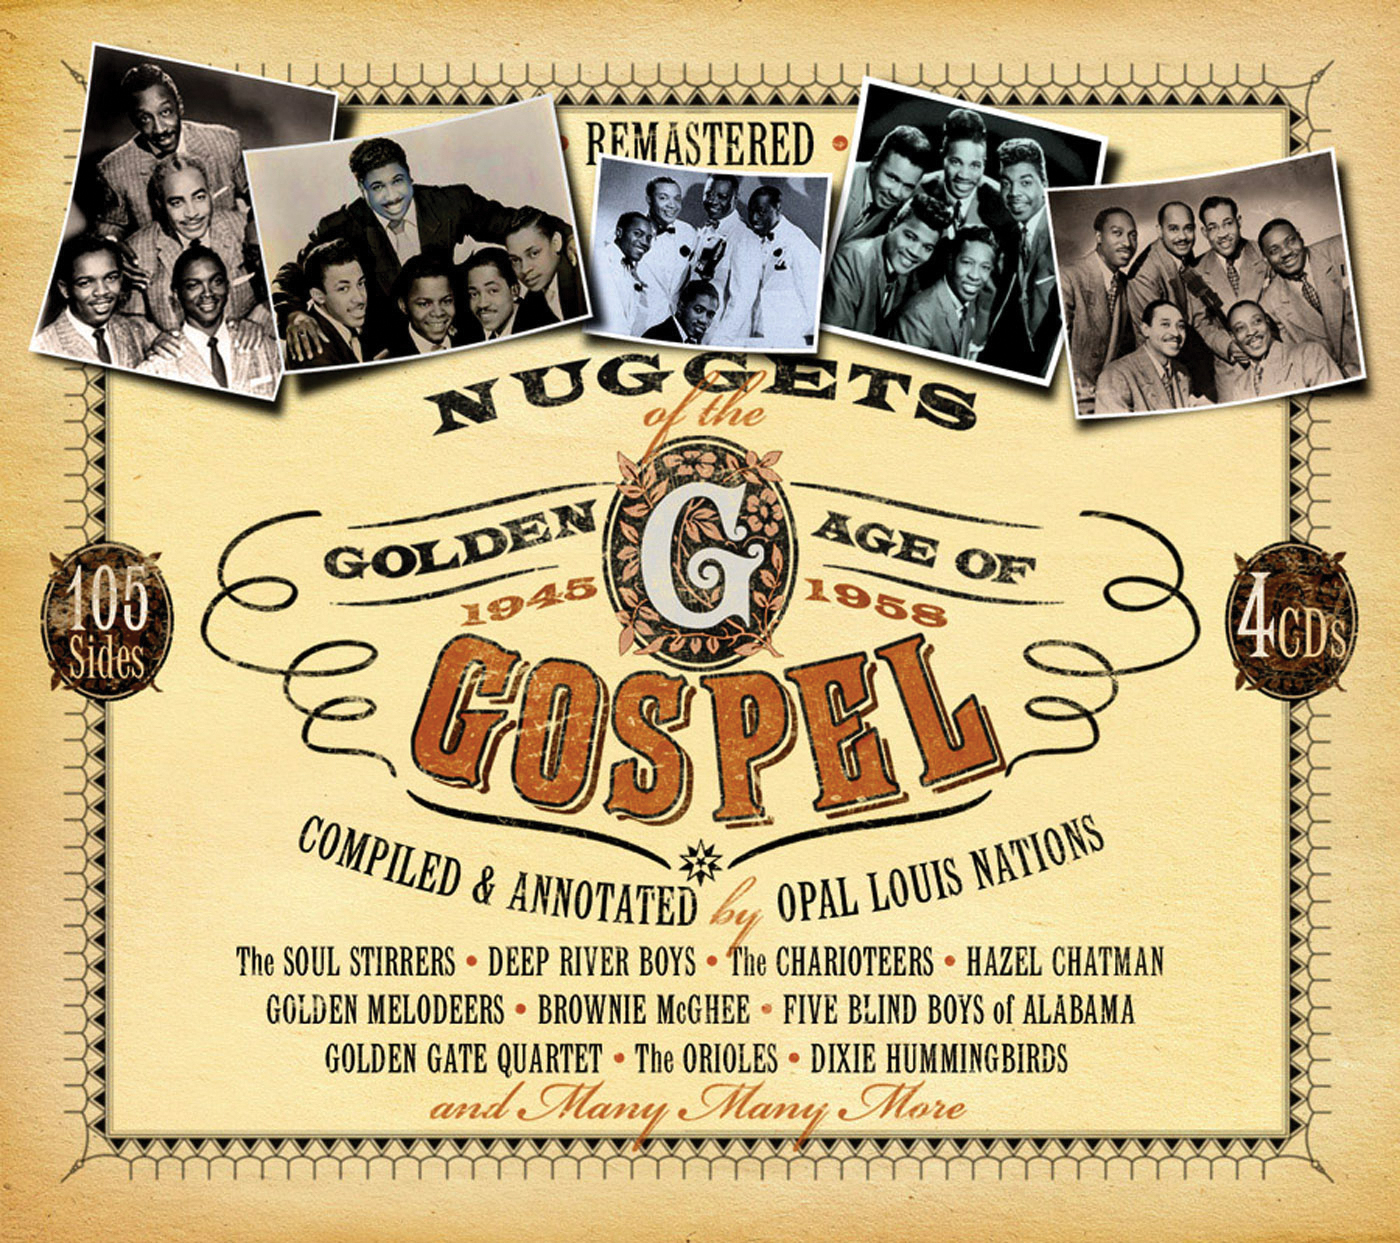 Nuggets of the Golden Age of Gospel 1945-1958